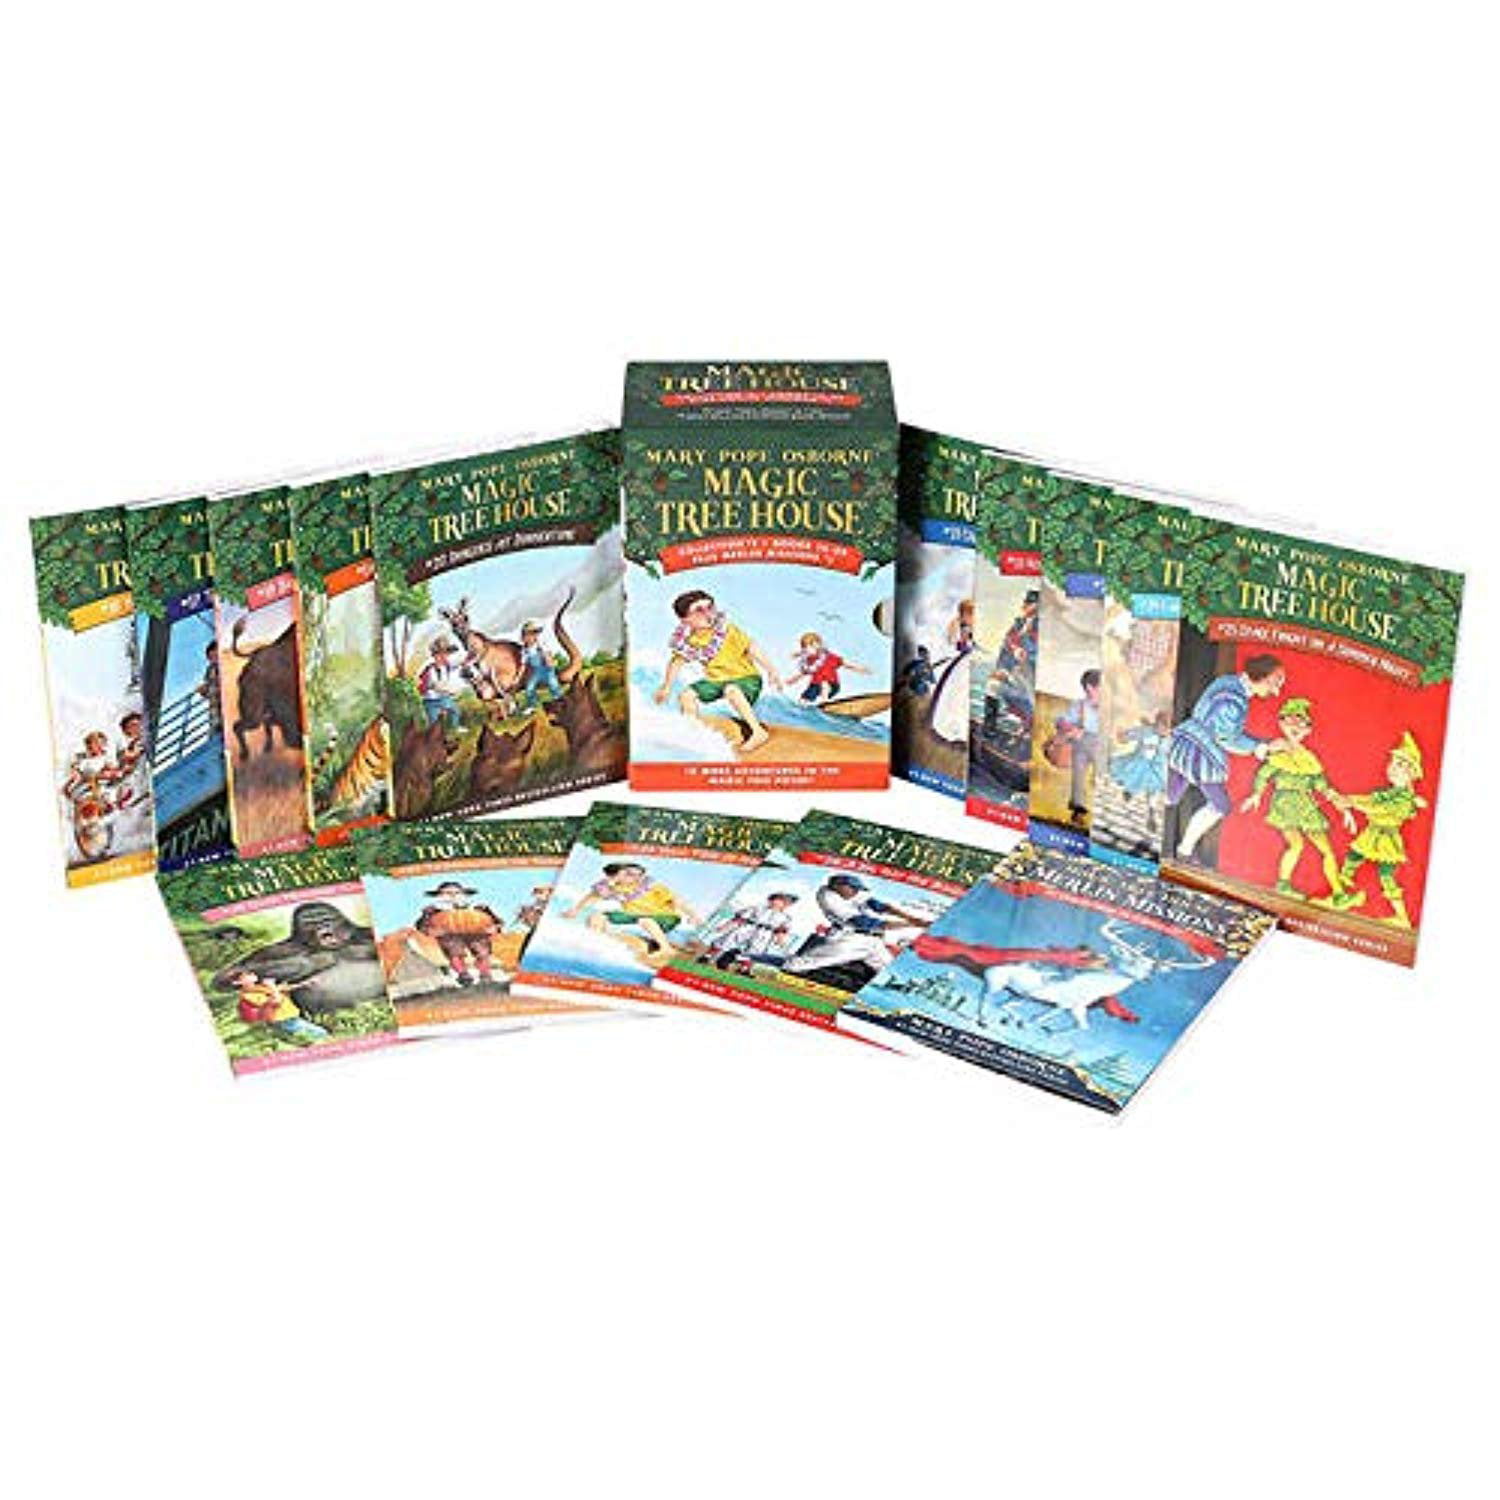 Magic Tree House Collection: Books 25-32 by Mary Pope Osborne